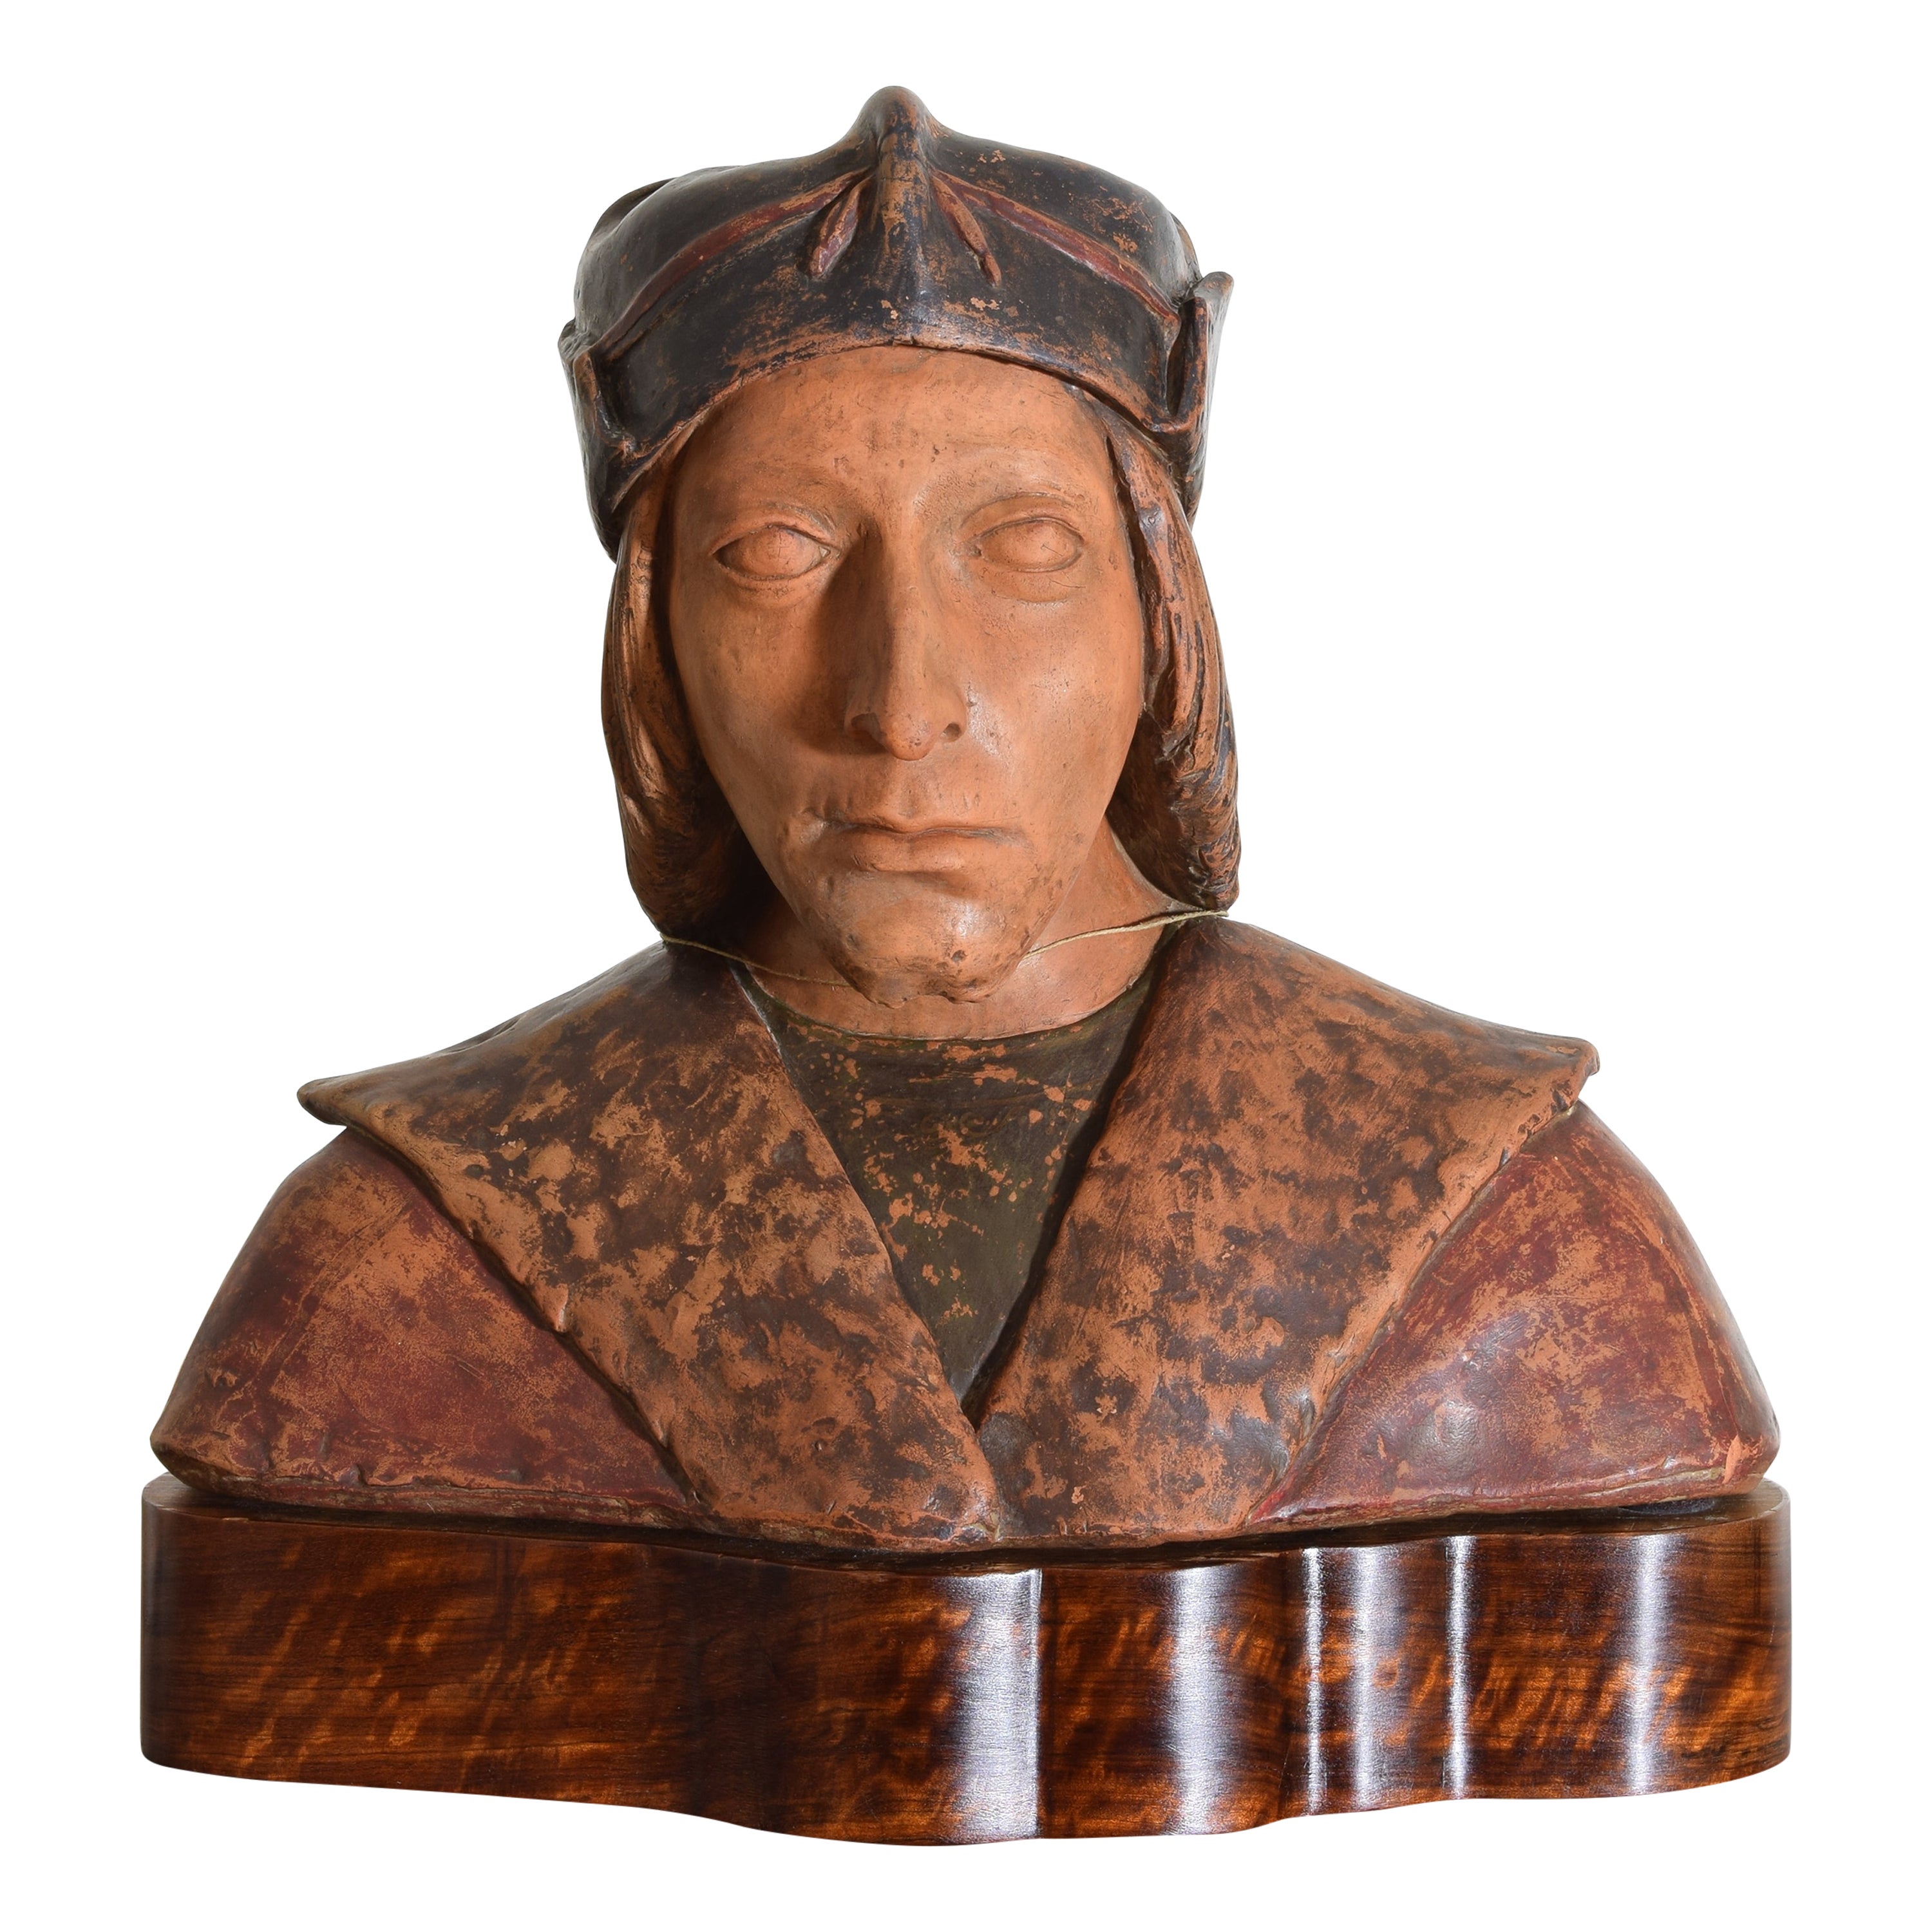 Italian Terra Cotta Bust of Dante Alighieri on Wooden Stand, Early 20th Century For Sale